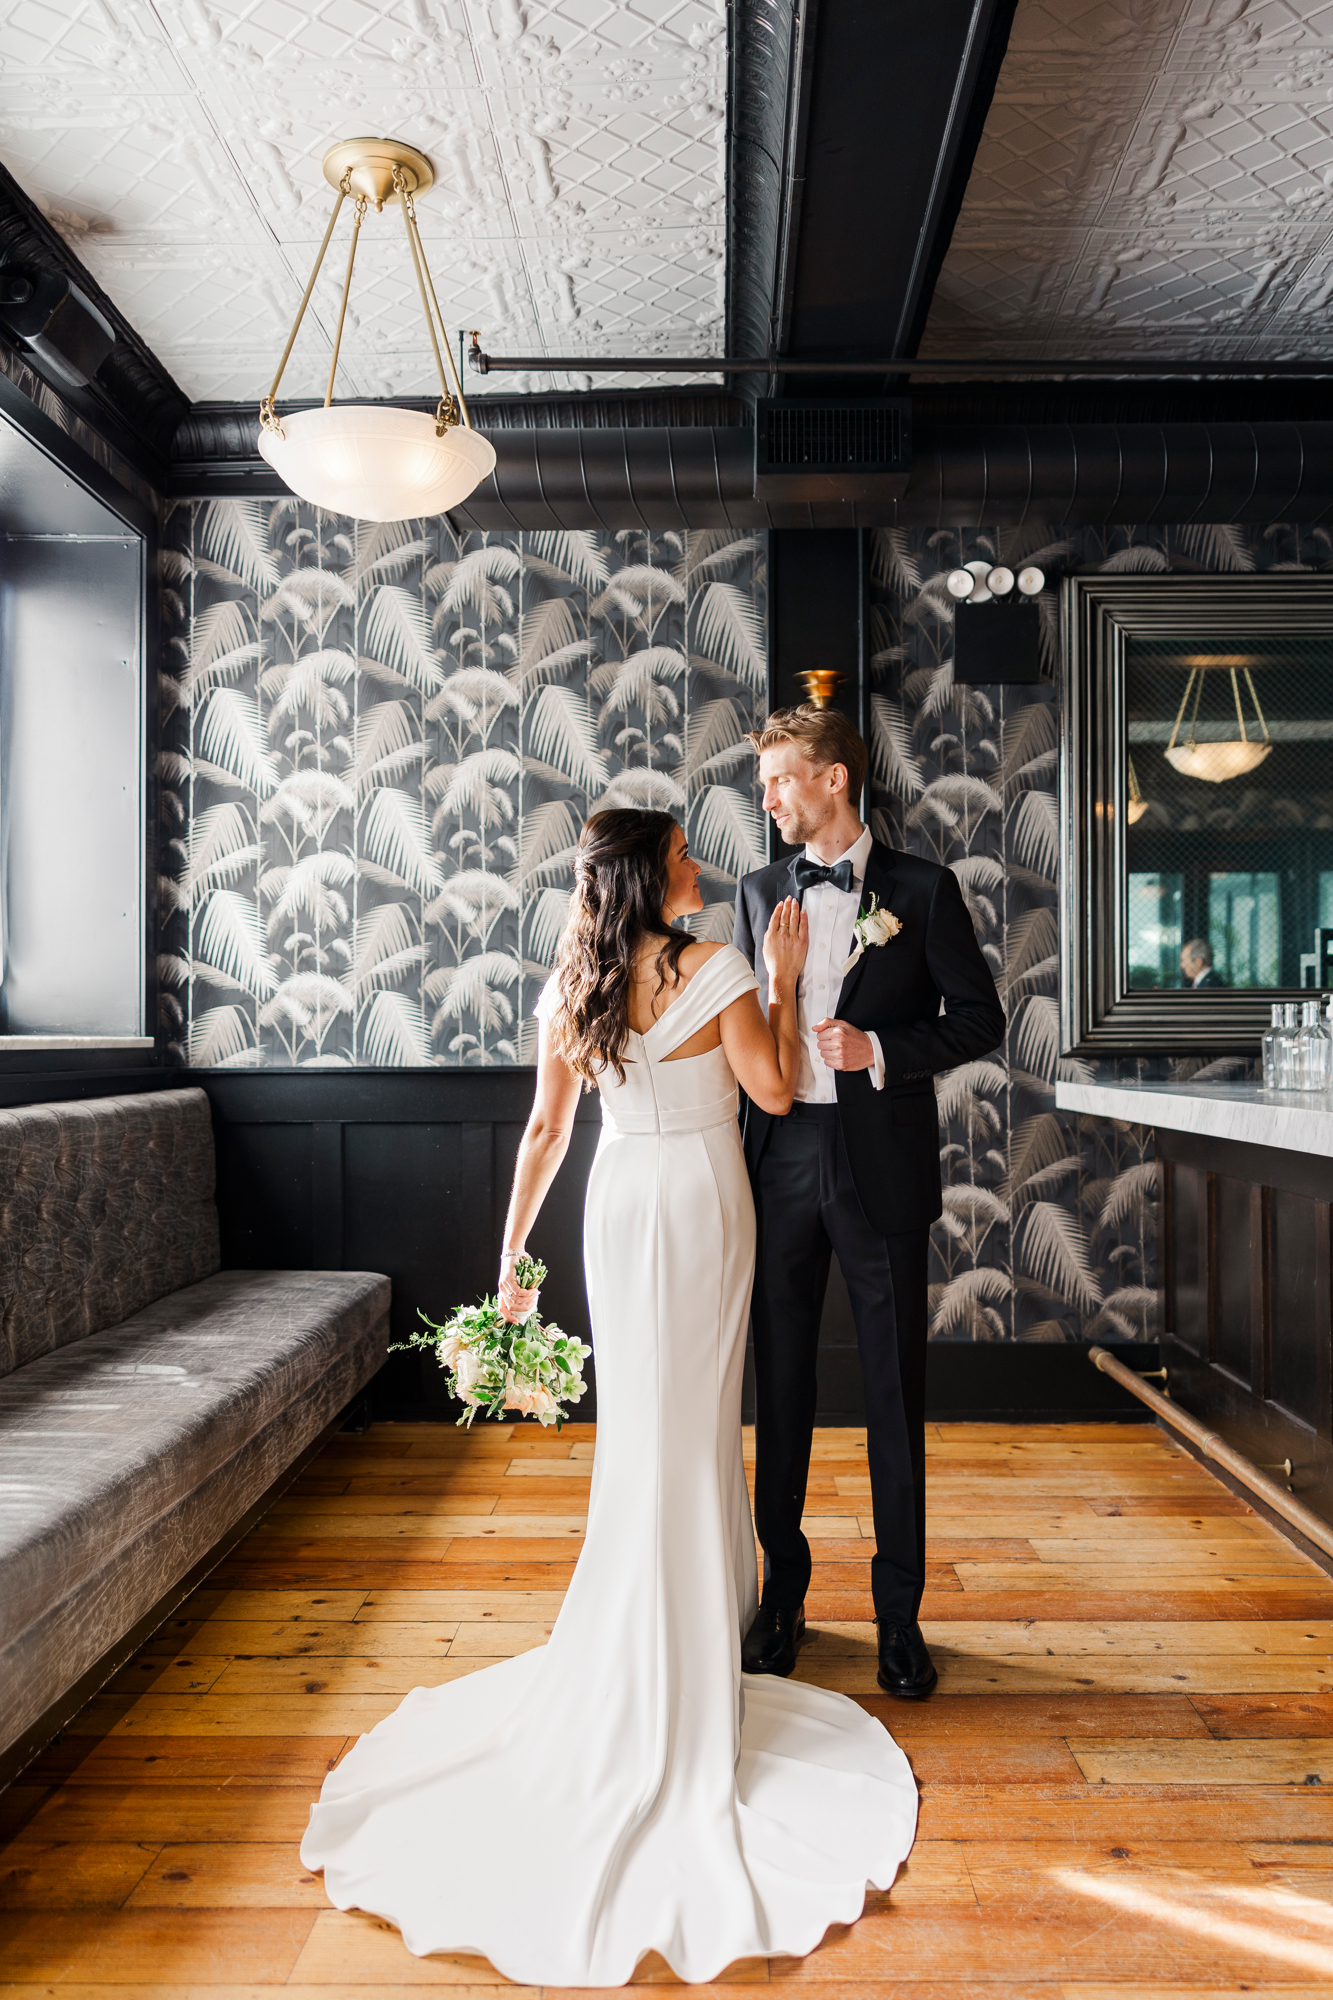 Candid Wedding at 501 Union in NYC